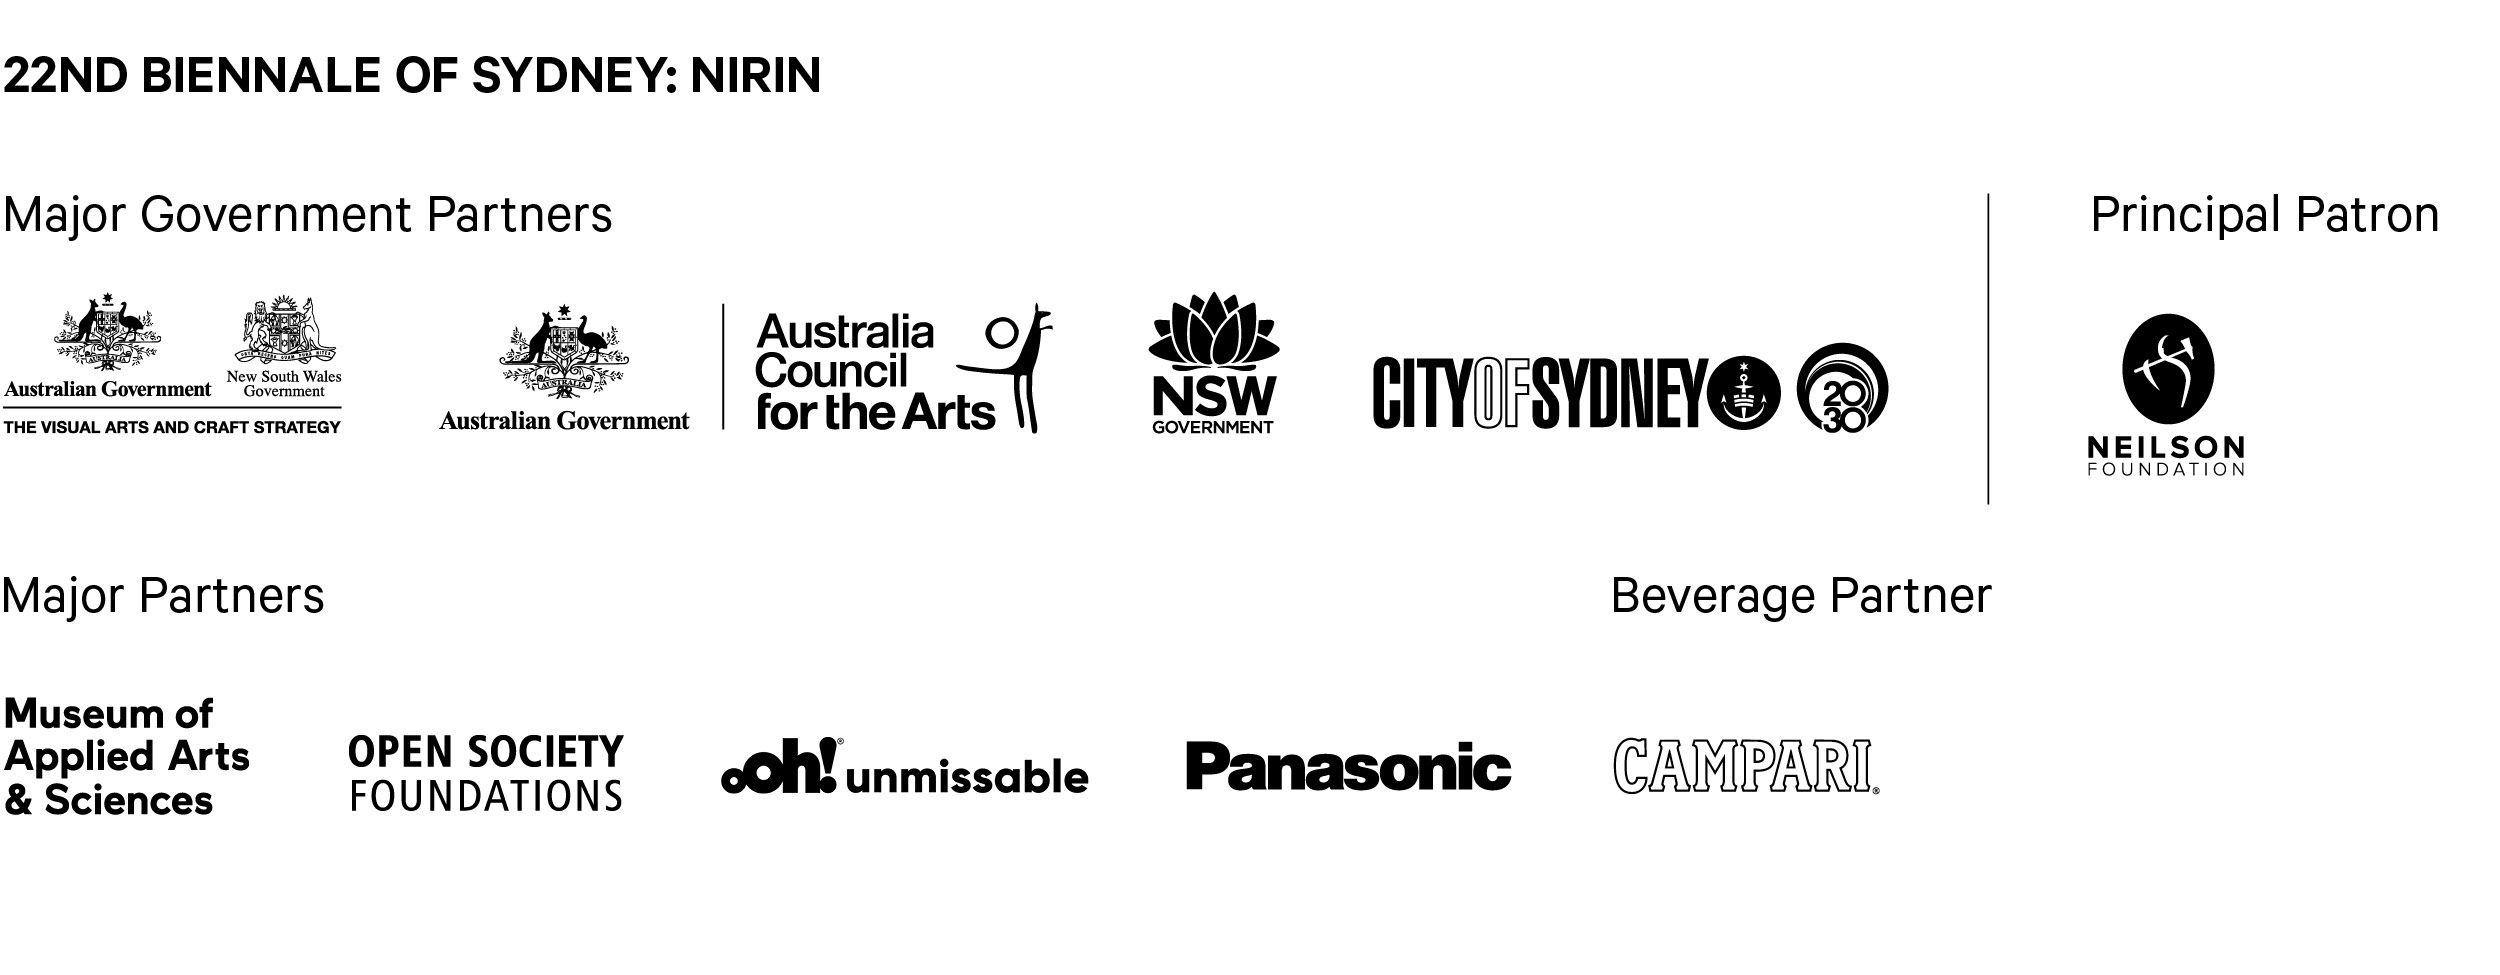 The Museum of Contemporary Art is proudly supported by Major Government Partners, Australian Government, New South Wales Government, The Visual Arts and Craft Strategy, Australia Council for the Arts, City of Sydney; Principal Patron Neilson Foundation; Major Partners, Museum of Applied Arts & Sciences, Open Society Foundations, oOh unmissable, Panasonic; Beverage Partner Campari.